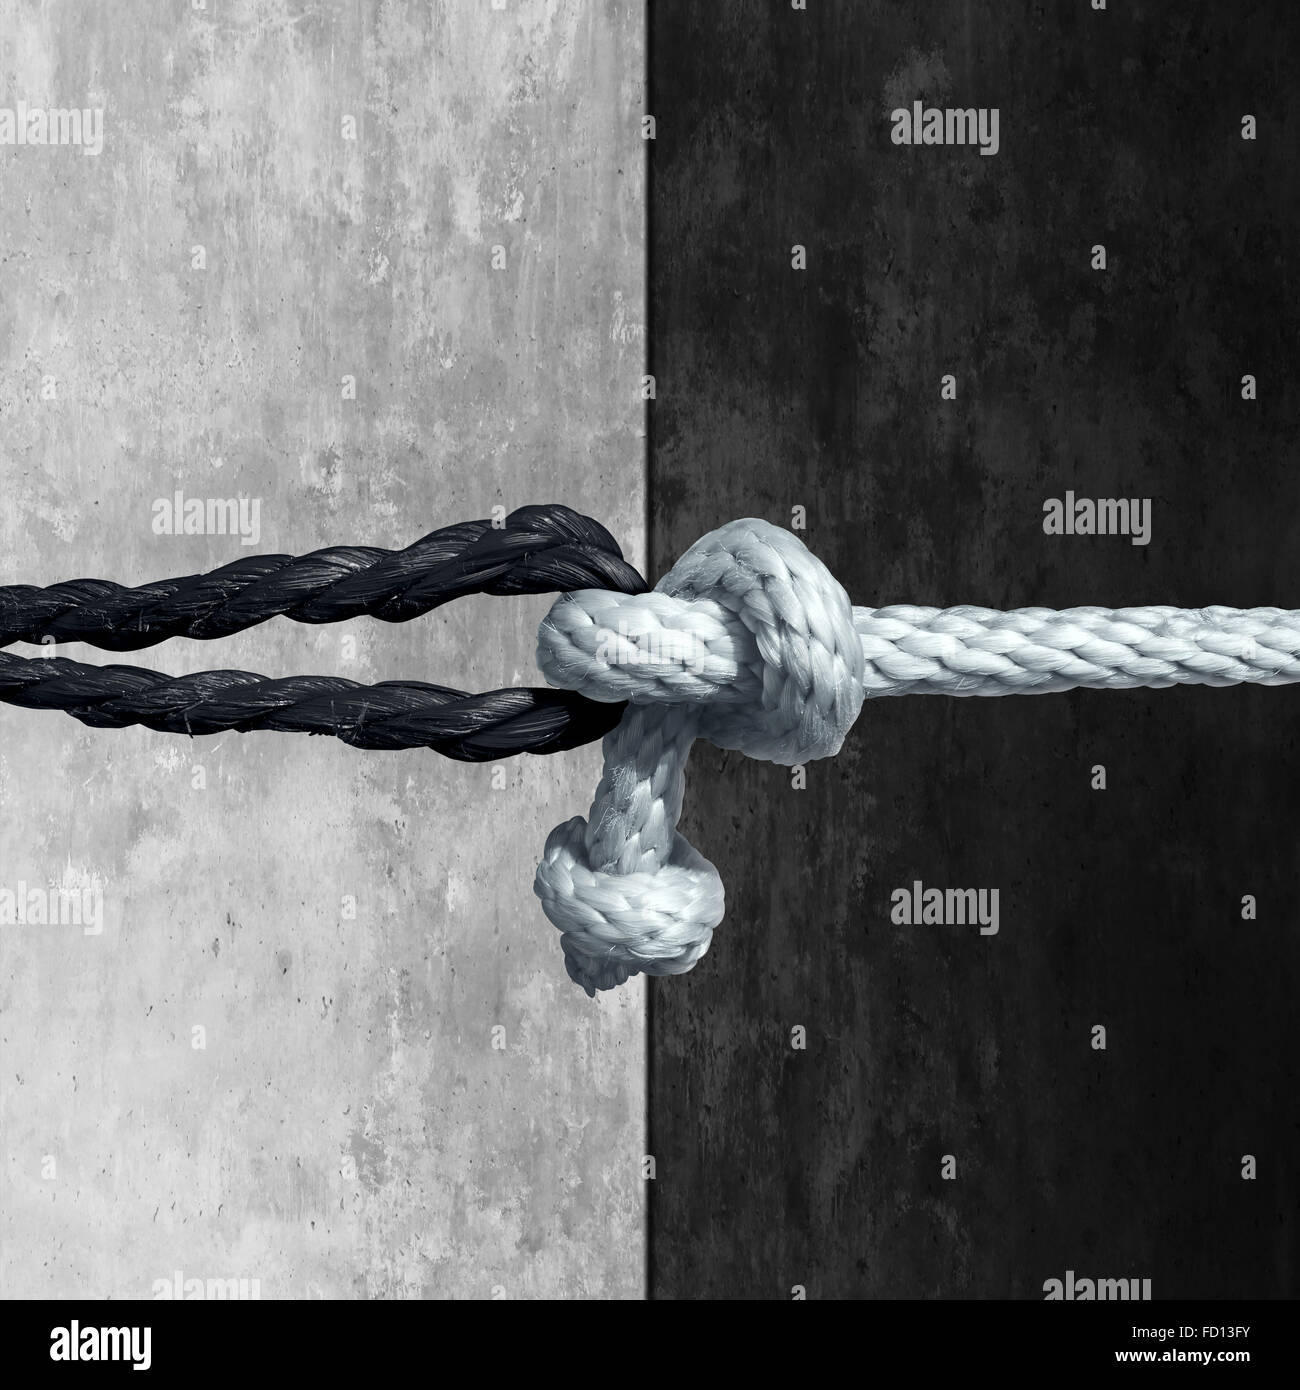 Racial unity concept as a symbol against racism in society as a white and black rope tied together as a metaphor for friendship Stock Photo